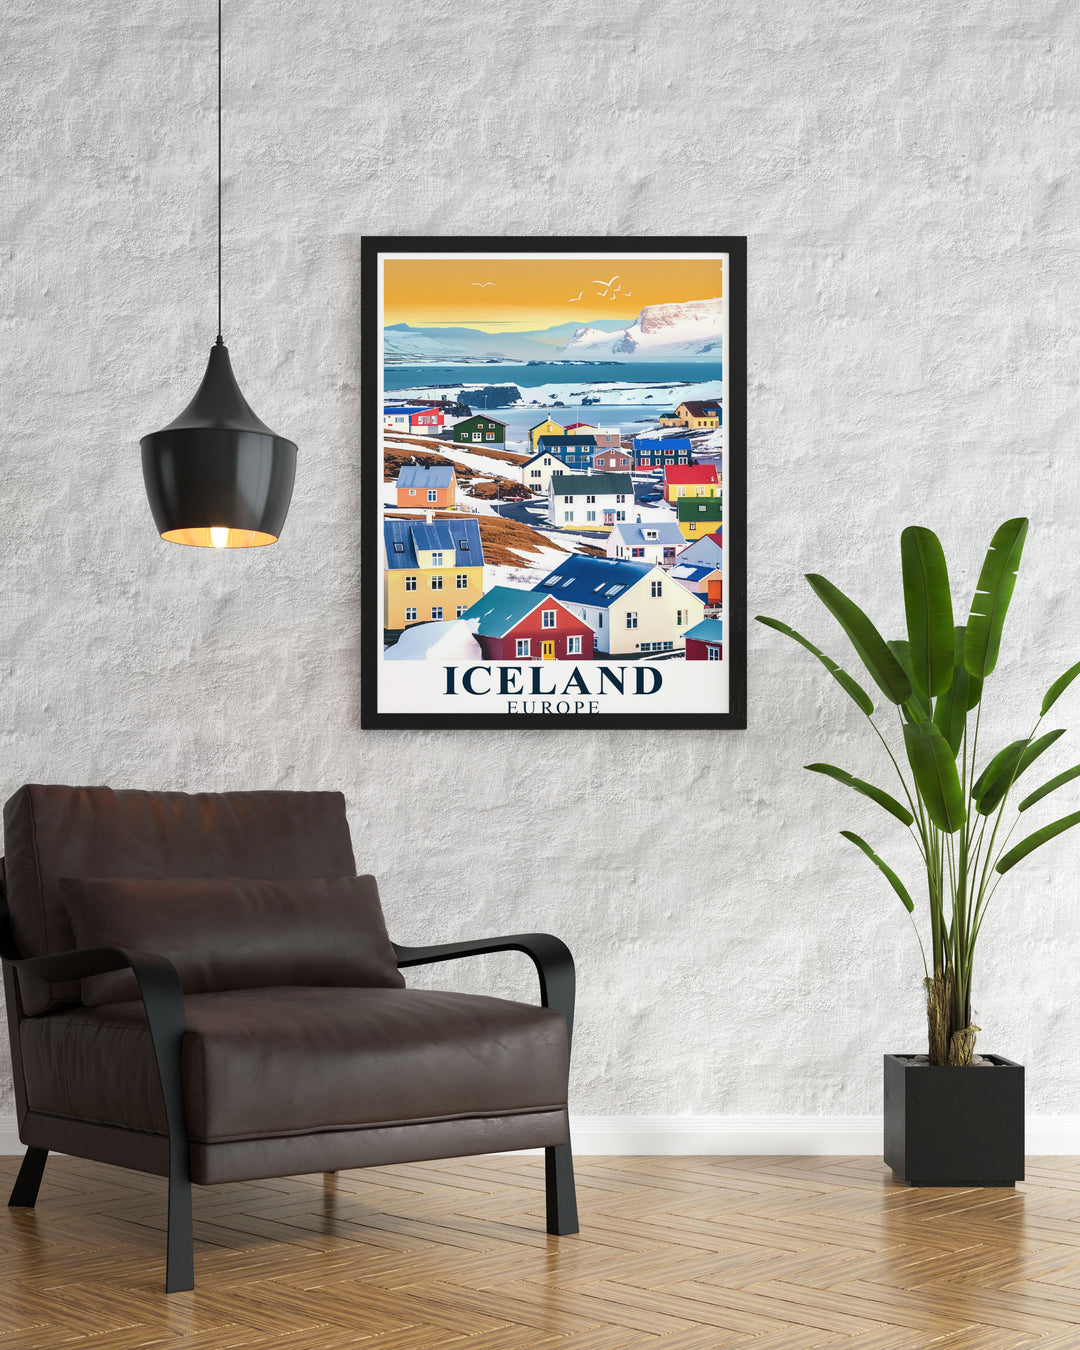 Vintage poster of Ísafjörður, showcasing the towns historical significance and natural beauty, with a serene harbor and colorful homes set against dramatic mountain peaks.